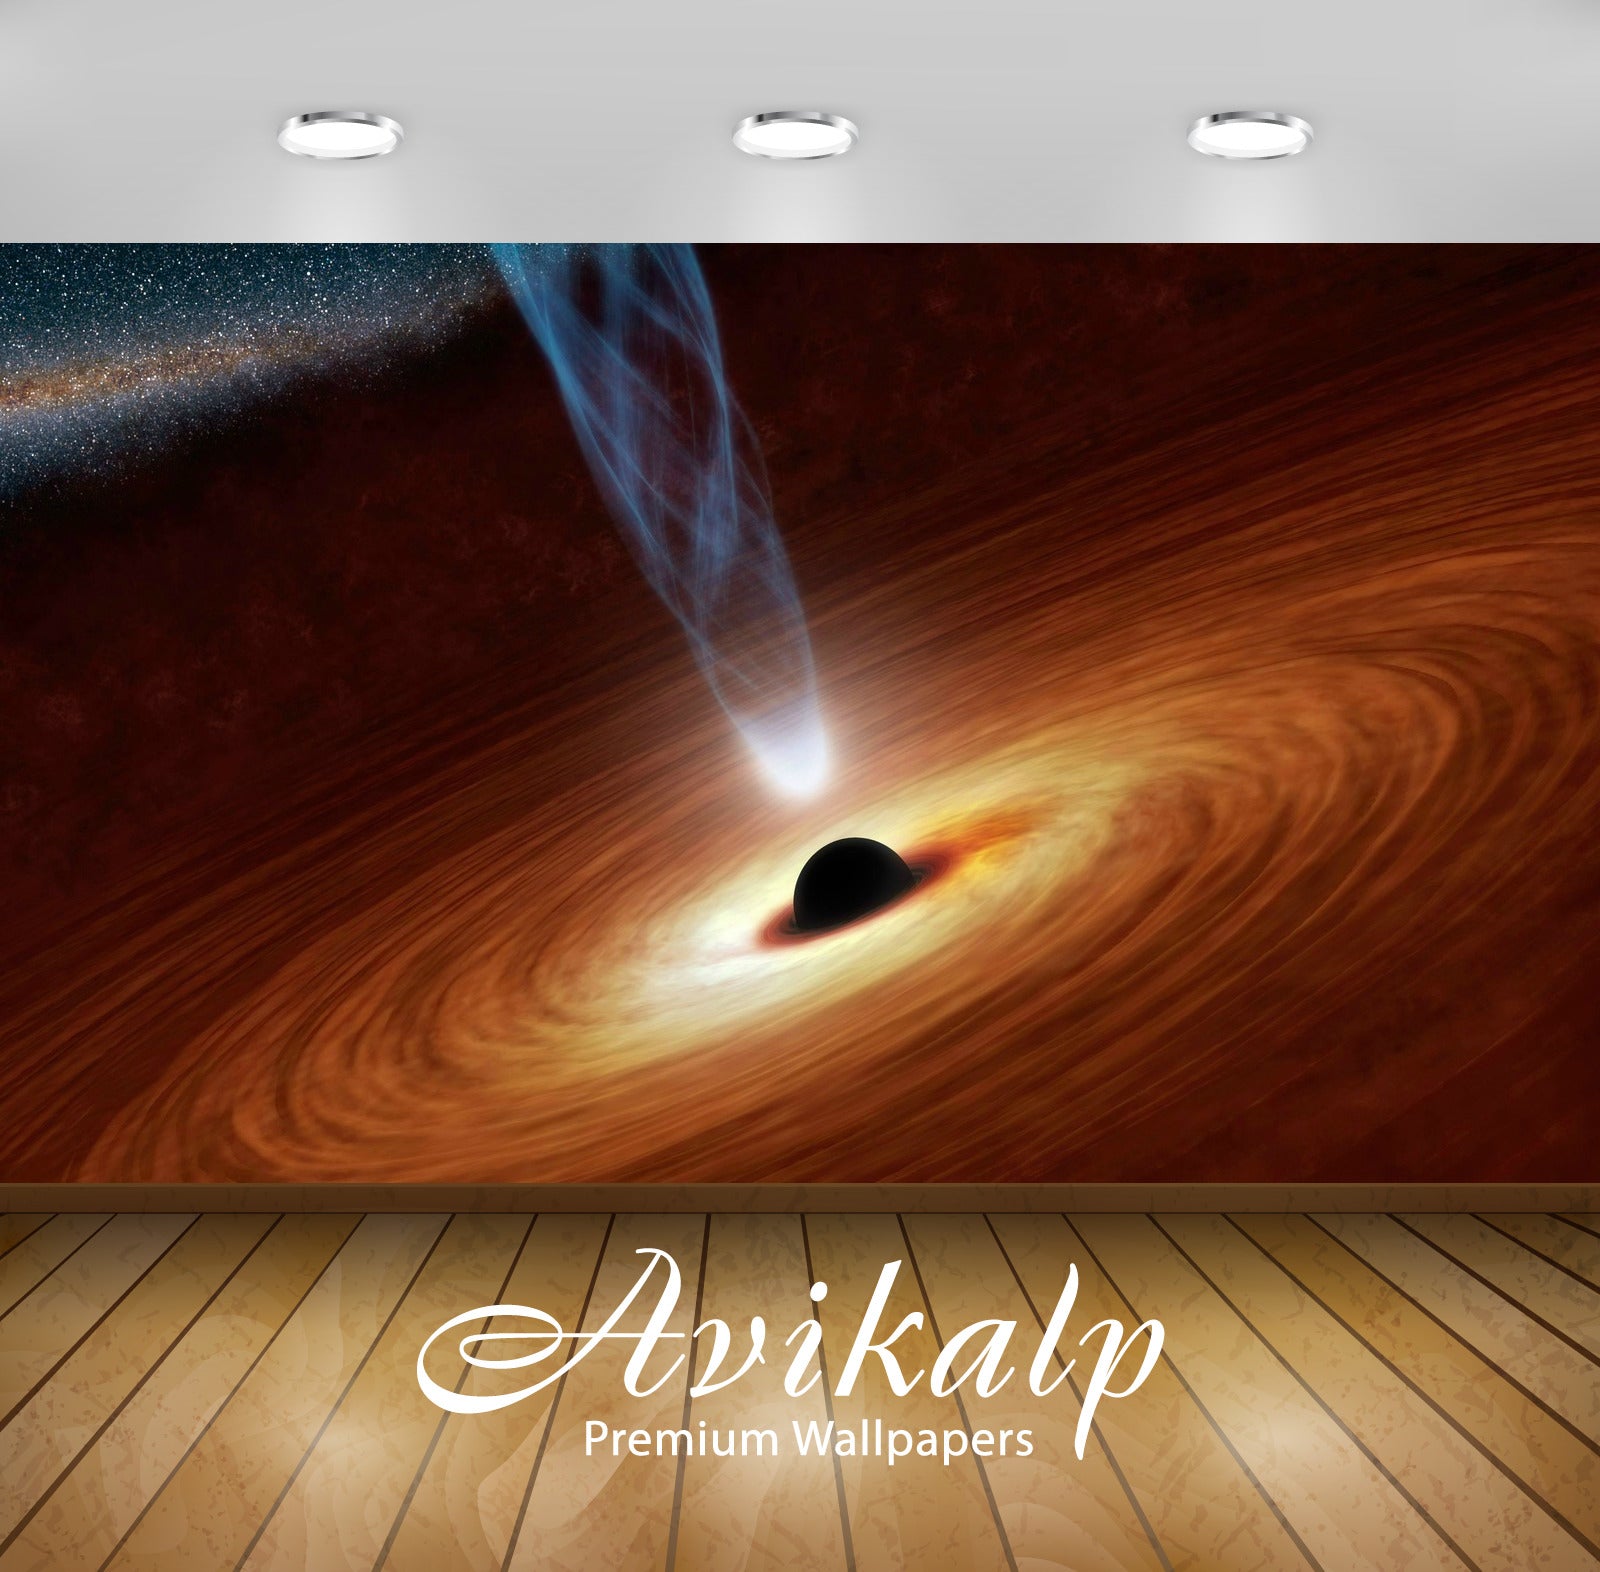 Avikalp Exclusive Awi1489 Black Hole Full HD Wallpapers for Living room, Hall, Kids Room, Kitchen, T